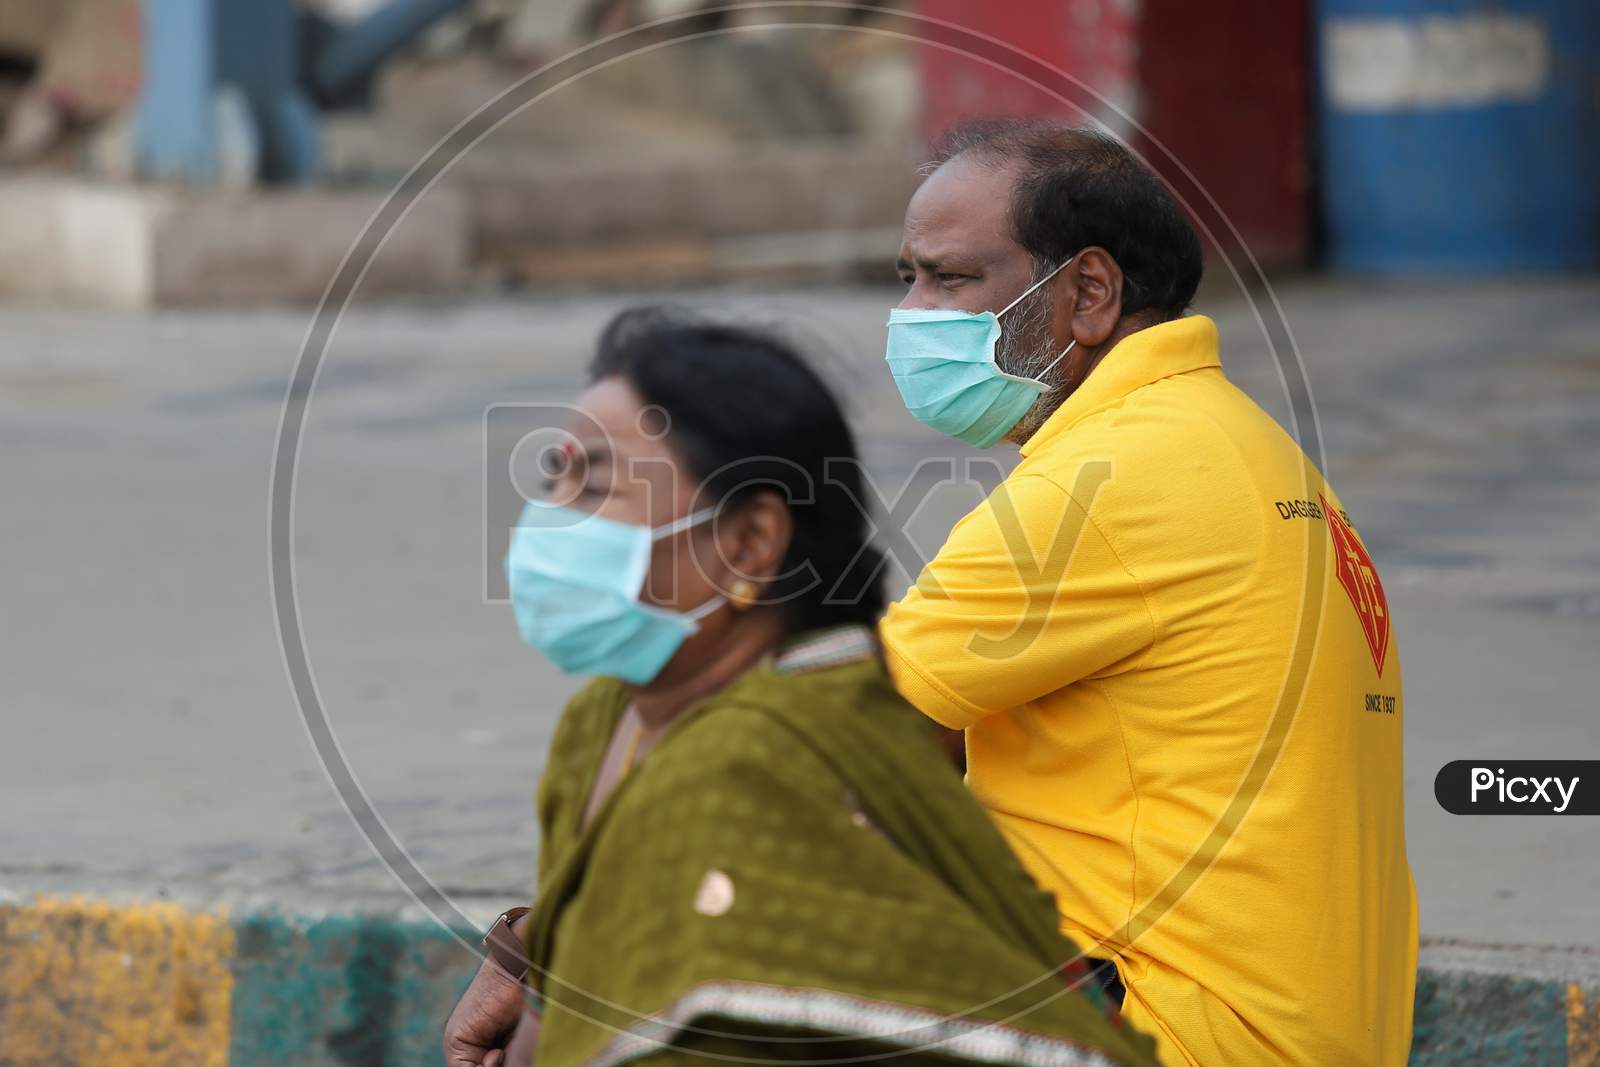 Passengers wear masks and wait for public transport buses in a bus station after the state eased lockdown norms during the nationwide lockdown to prevent the spread of coronavirus (COVID-19) in Bangalore, India.